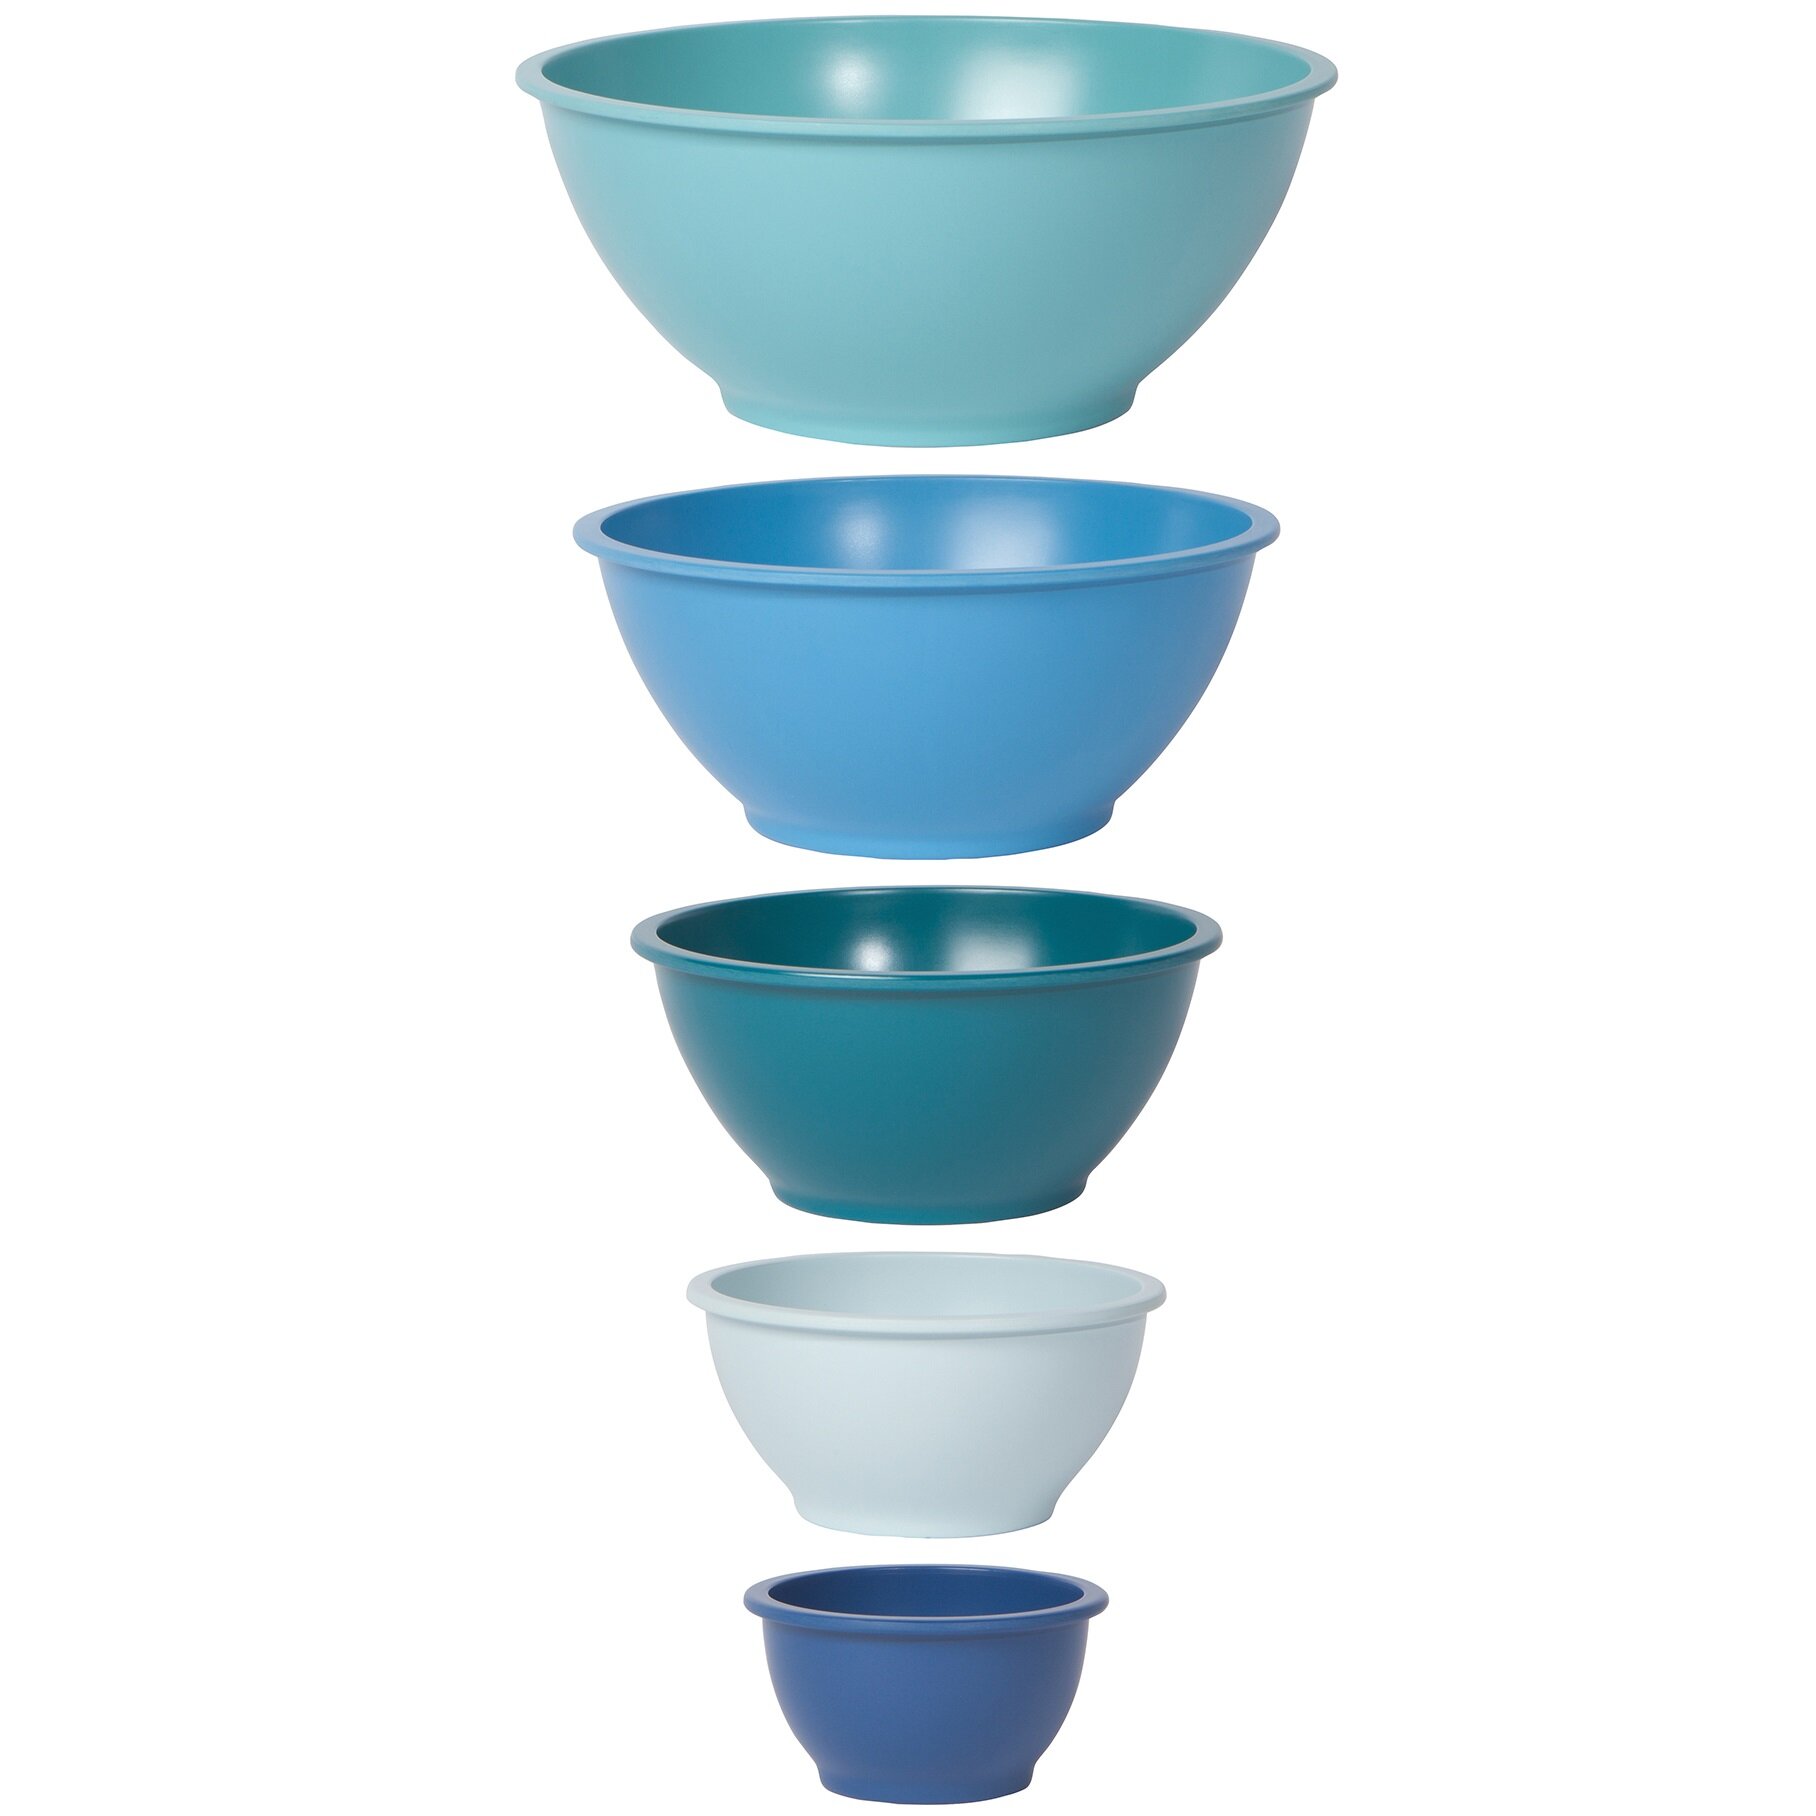 Tupperware Just Added a New Nested Mixing Bowl Set to Its